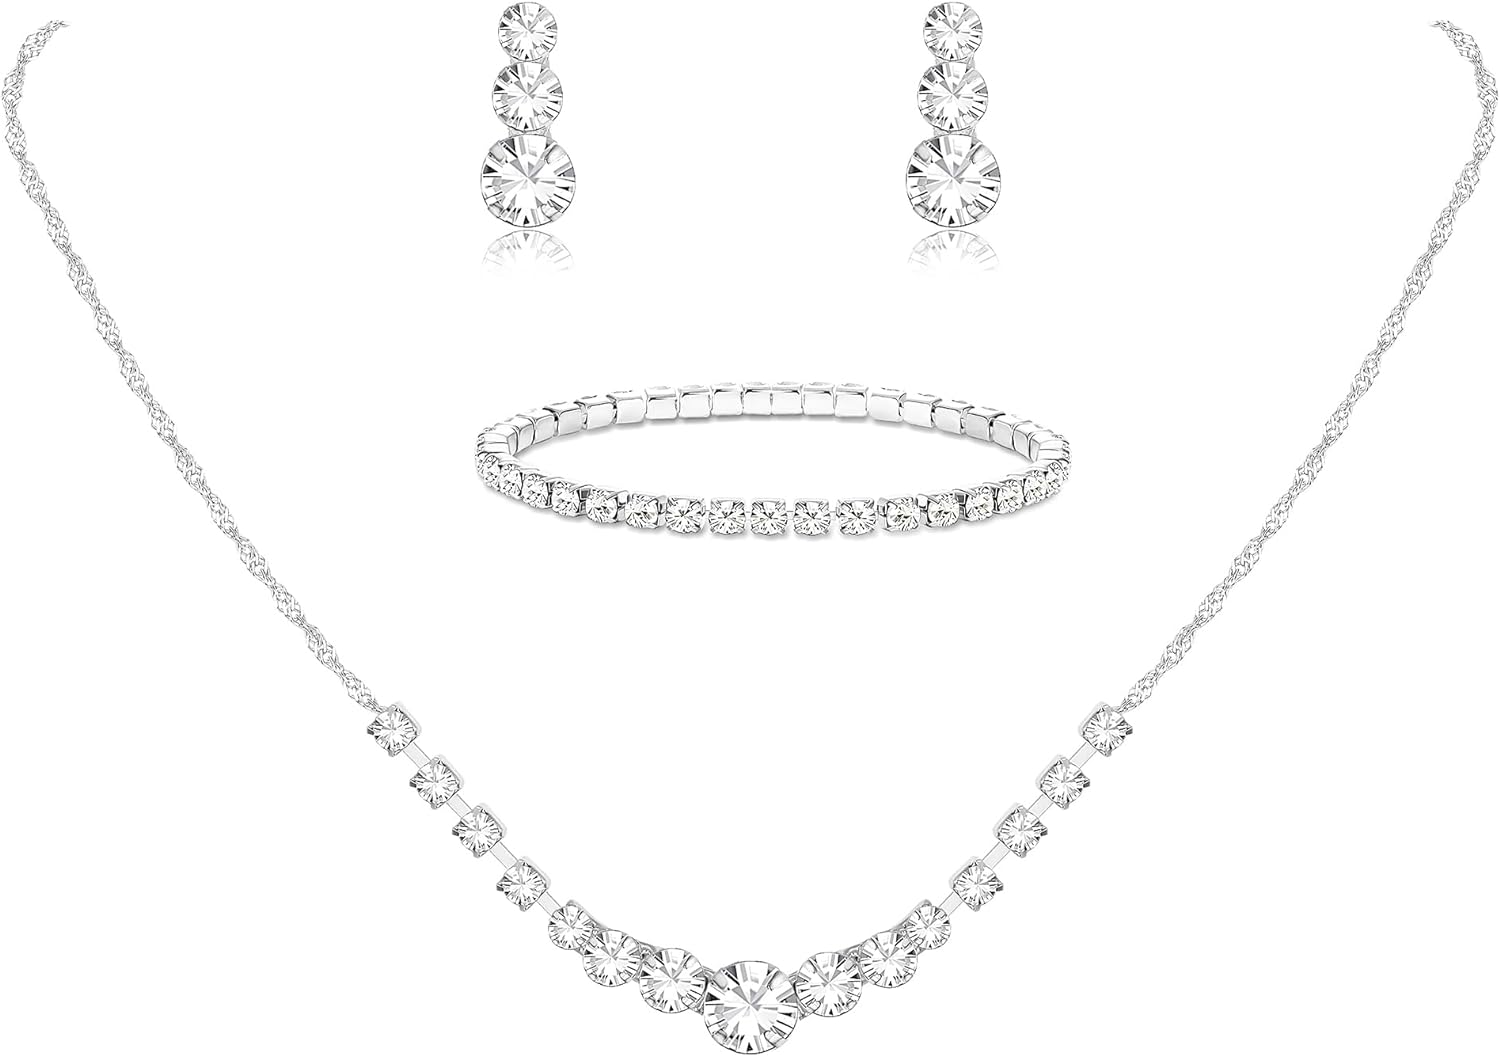 Jstyle Silver Jewelry Set for Women Rhinestone Crystal Necklace Drop Earrings Link Bangle Bracelet Bridal Wedding Jewelry Sets for Brides Bridemaid Prom Costume Accessories